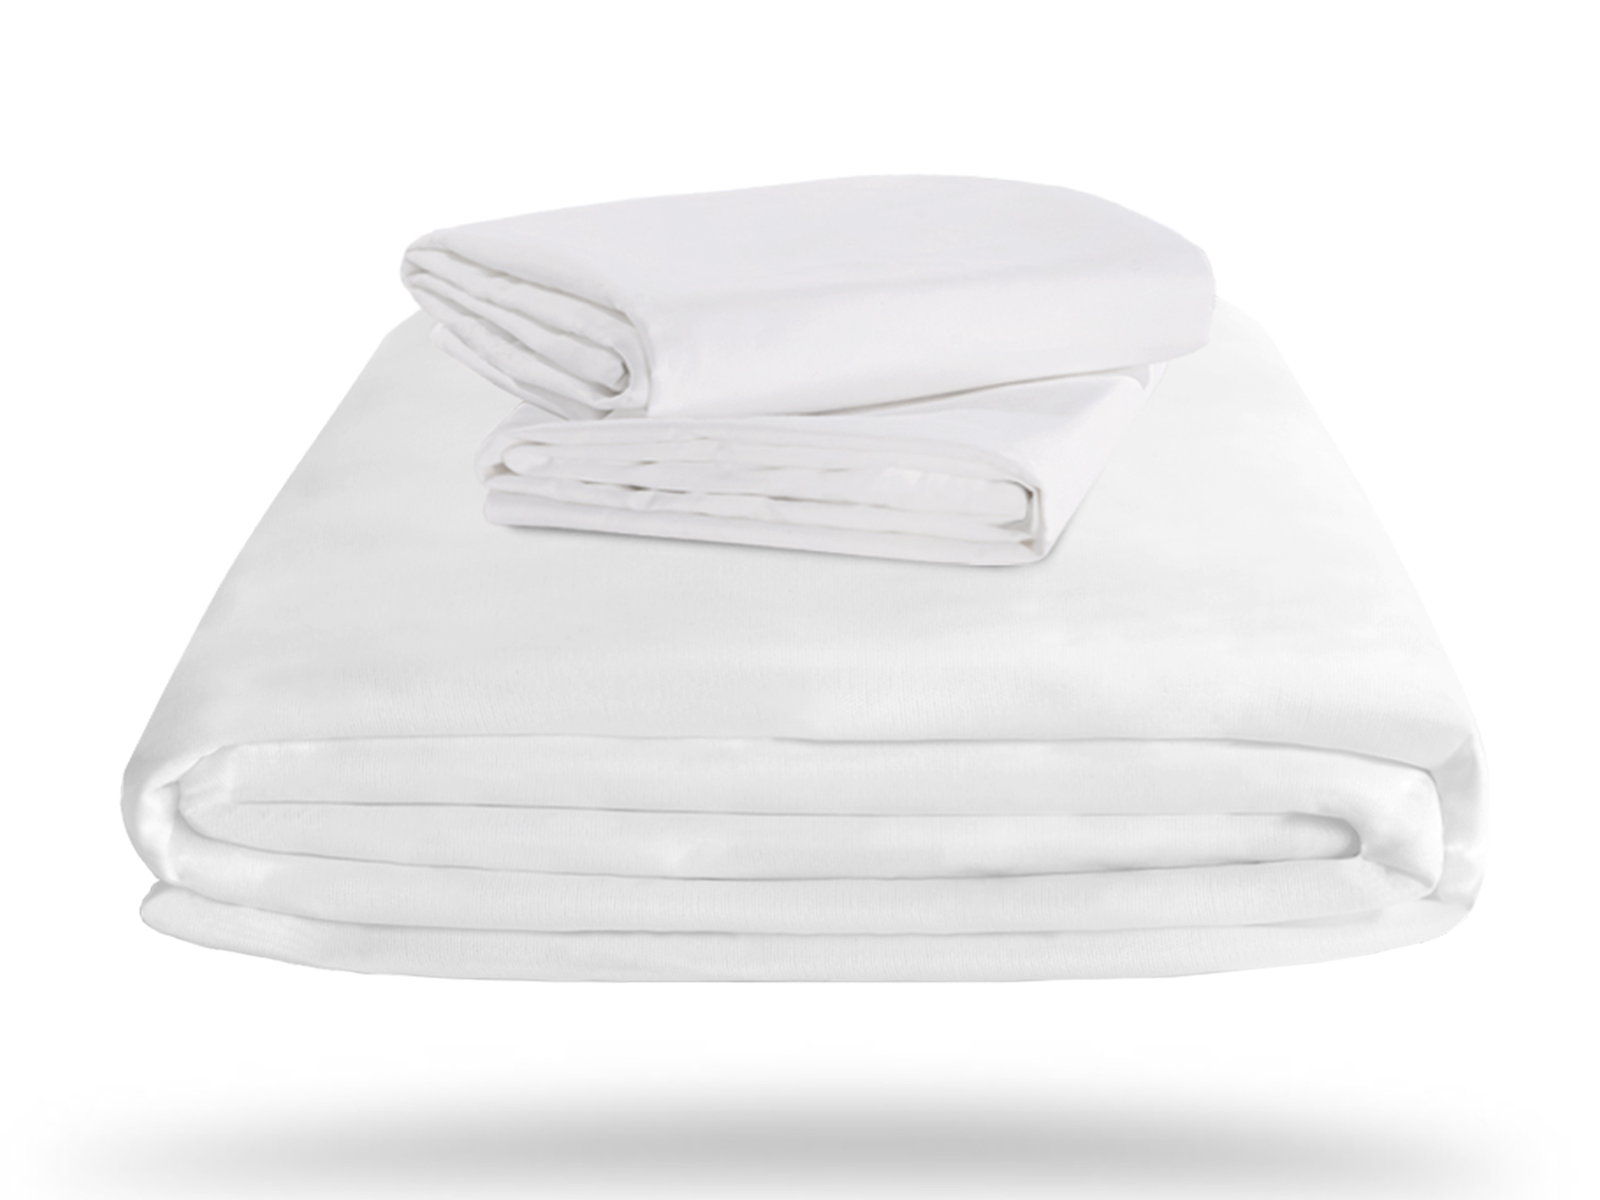 Bedgear Queen Germshield Mattress and Pillow Cover Set | Antimicrobial